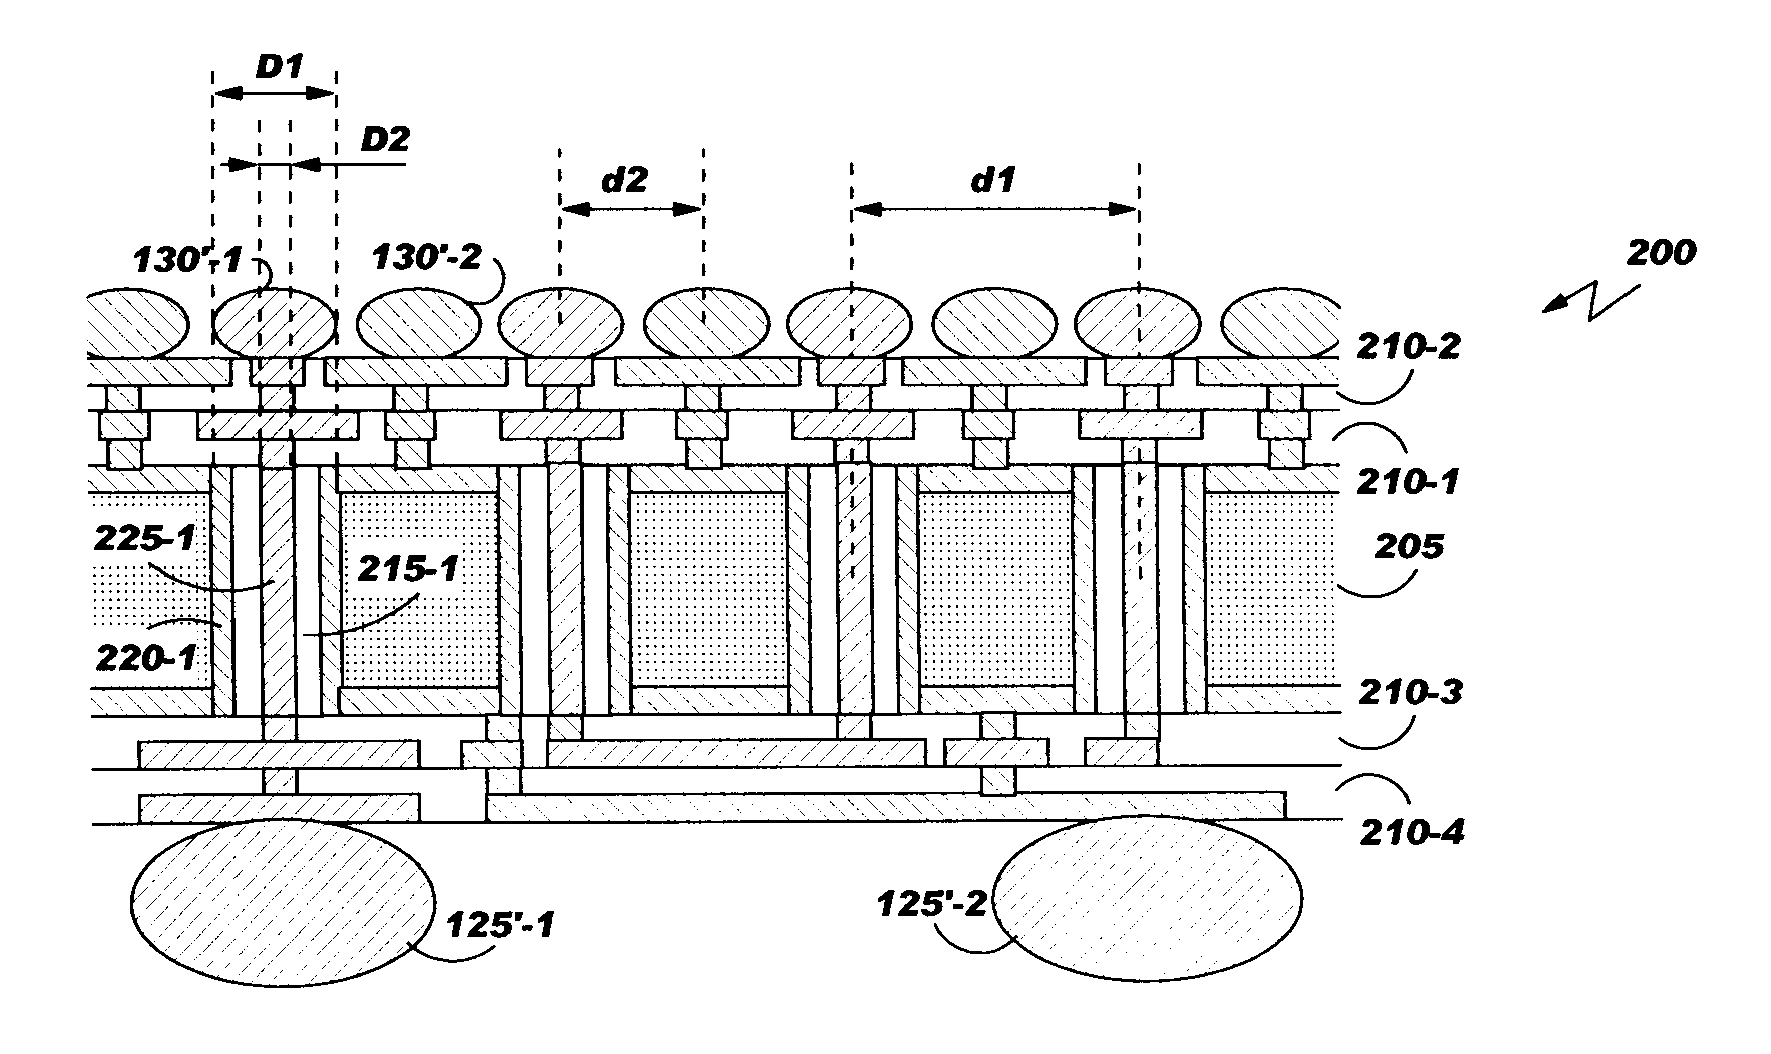 Power supply structure for high power circuit packages